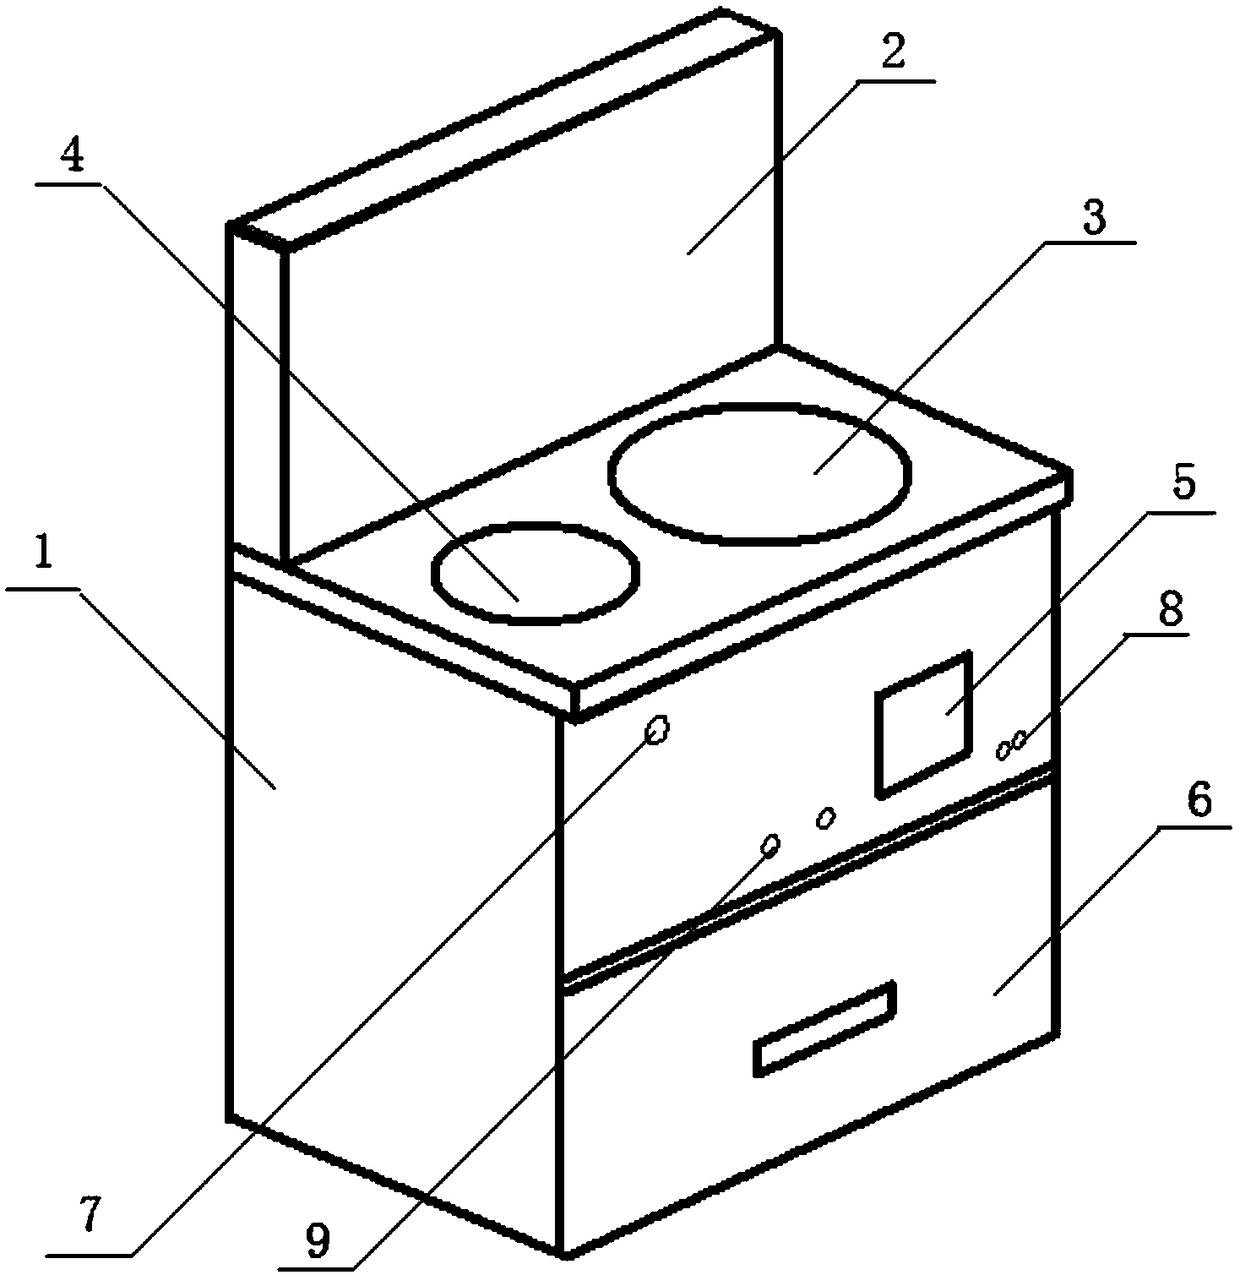 Wood-gas combinative integrated stove